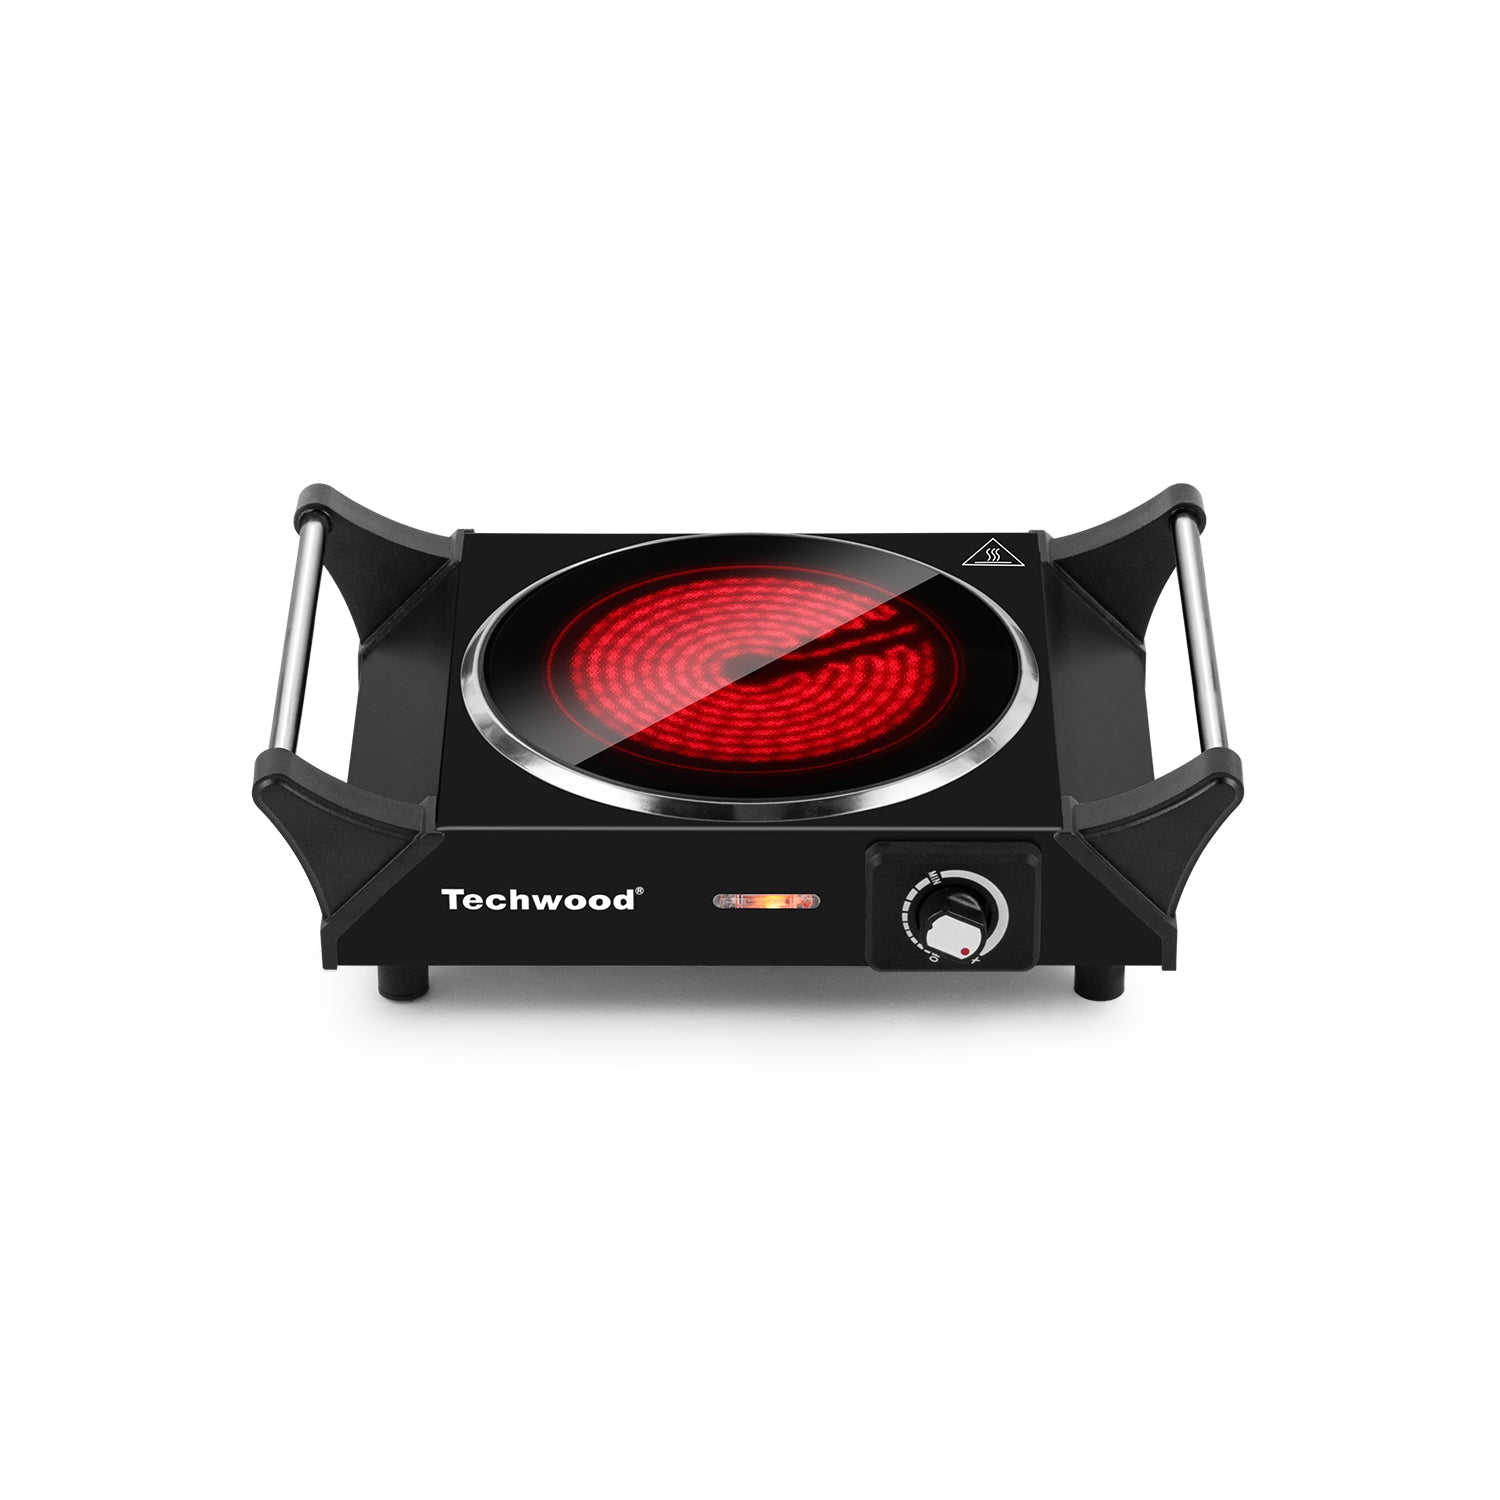 Techwood 1200W Hot Plate Countertop Infrared Ceramic Single Burner for  Cooking 7.5” Glass Cooktop Portable Electric Stove Compatible for All  Cookwares